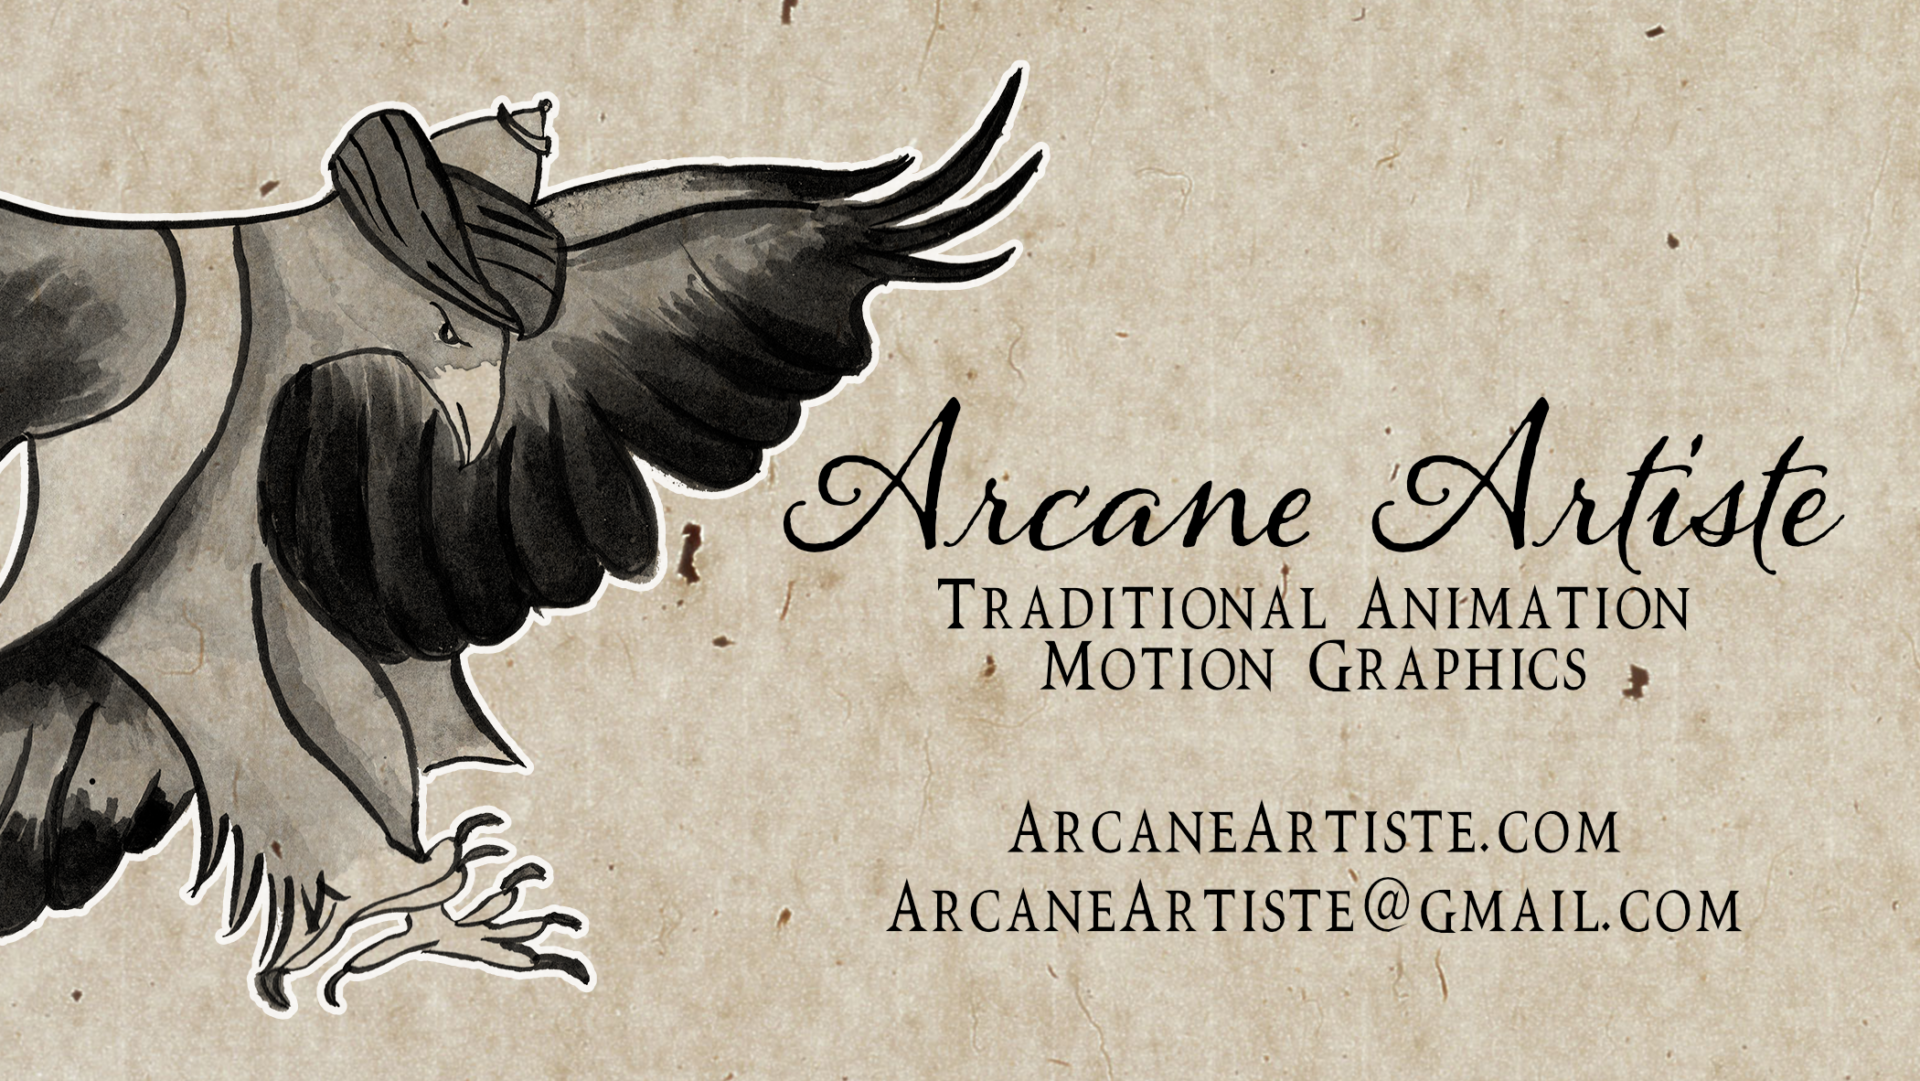 Ink illustration of an eagle wearing a turban and a vest. Text: Arcane Artiste. Traditional Animation. Motion Graphics. Arcane Artiste.com. ArcaneArtiste@gmail.com.